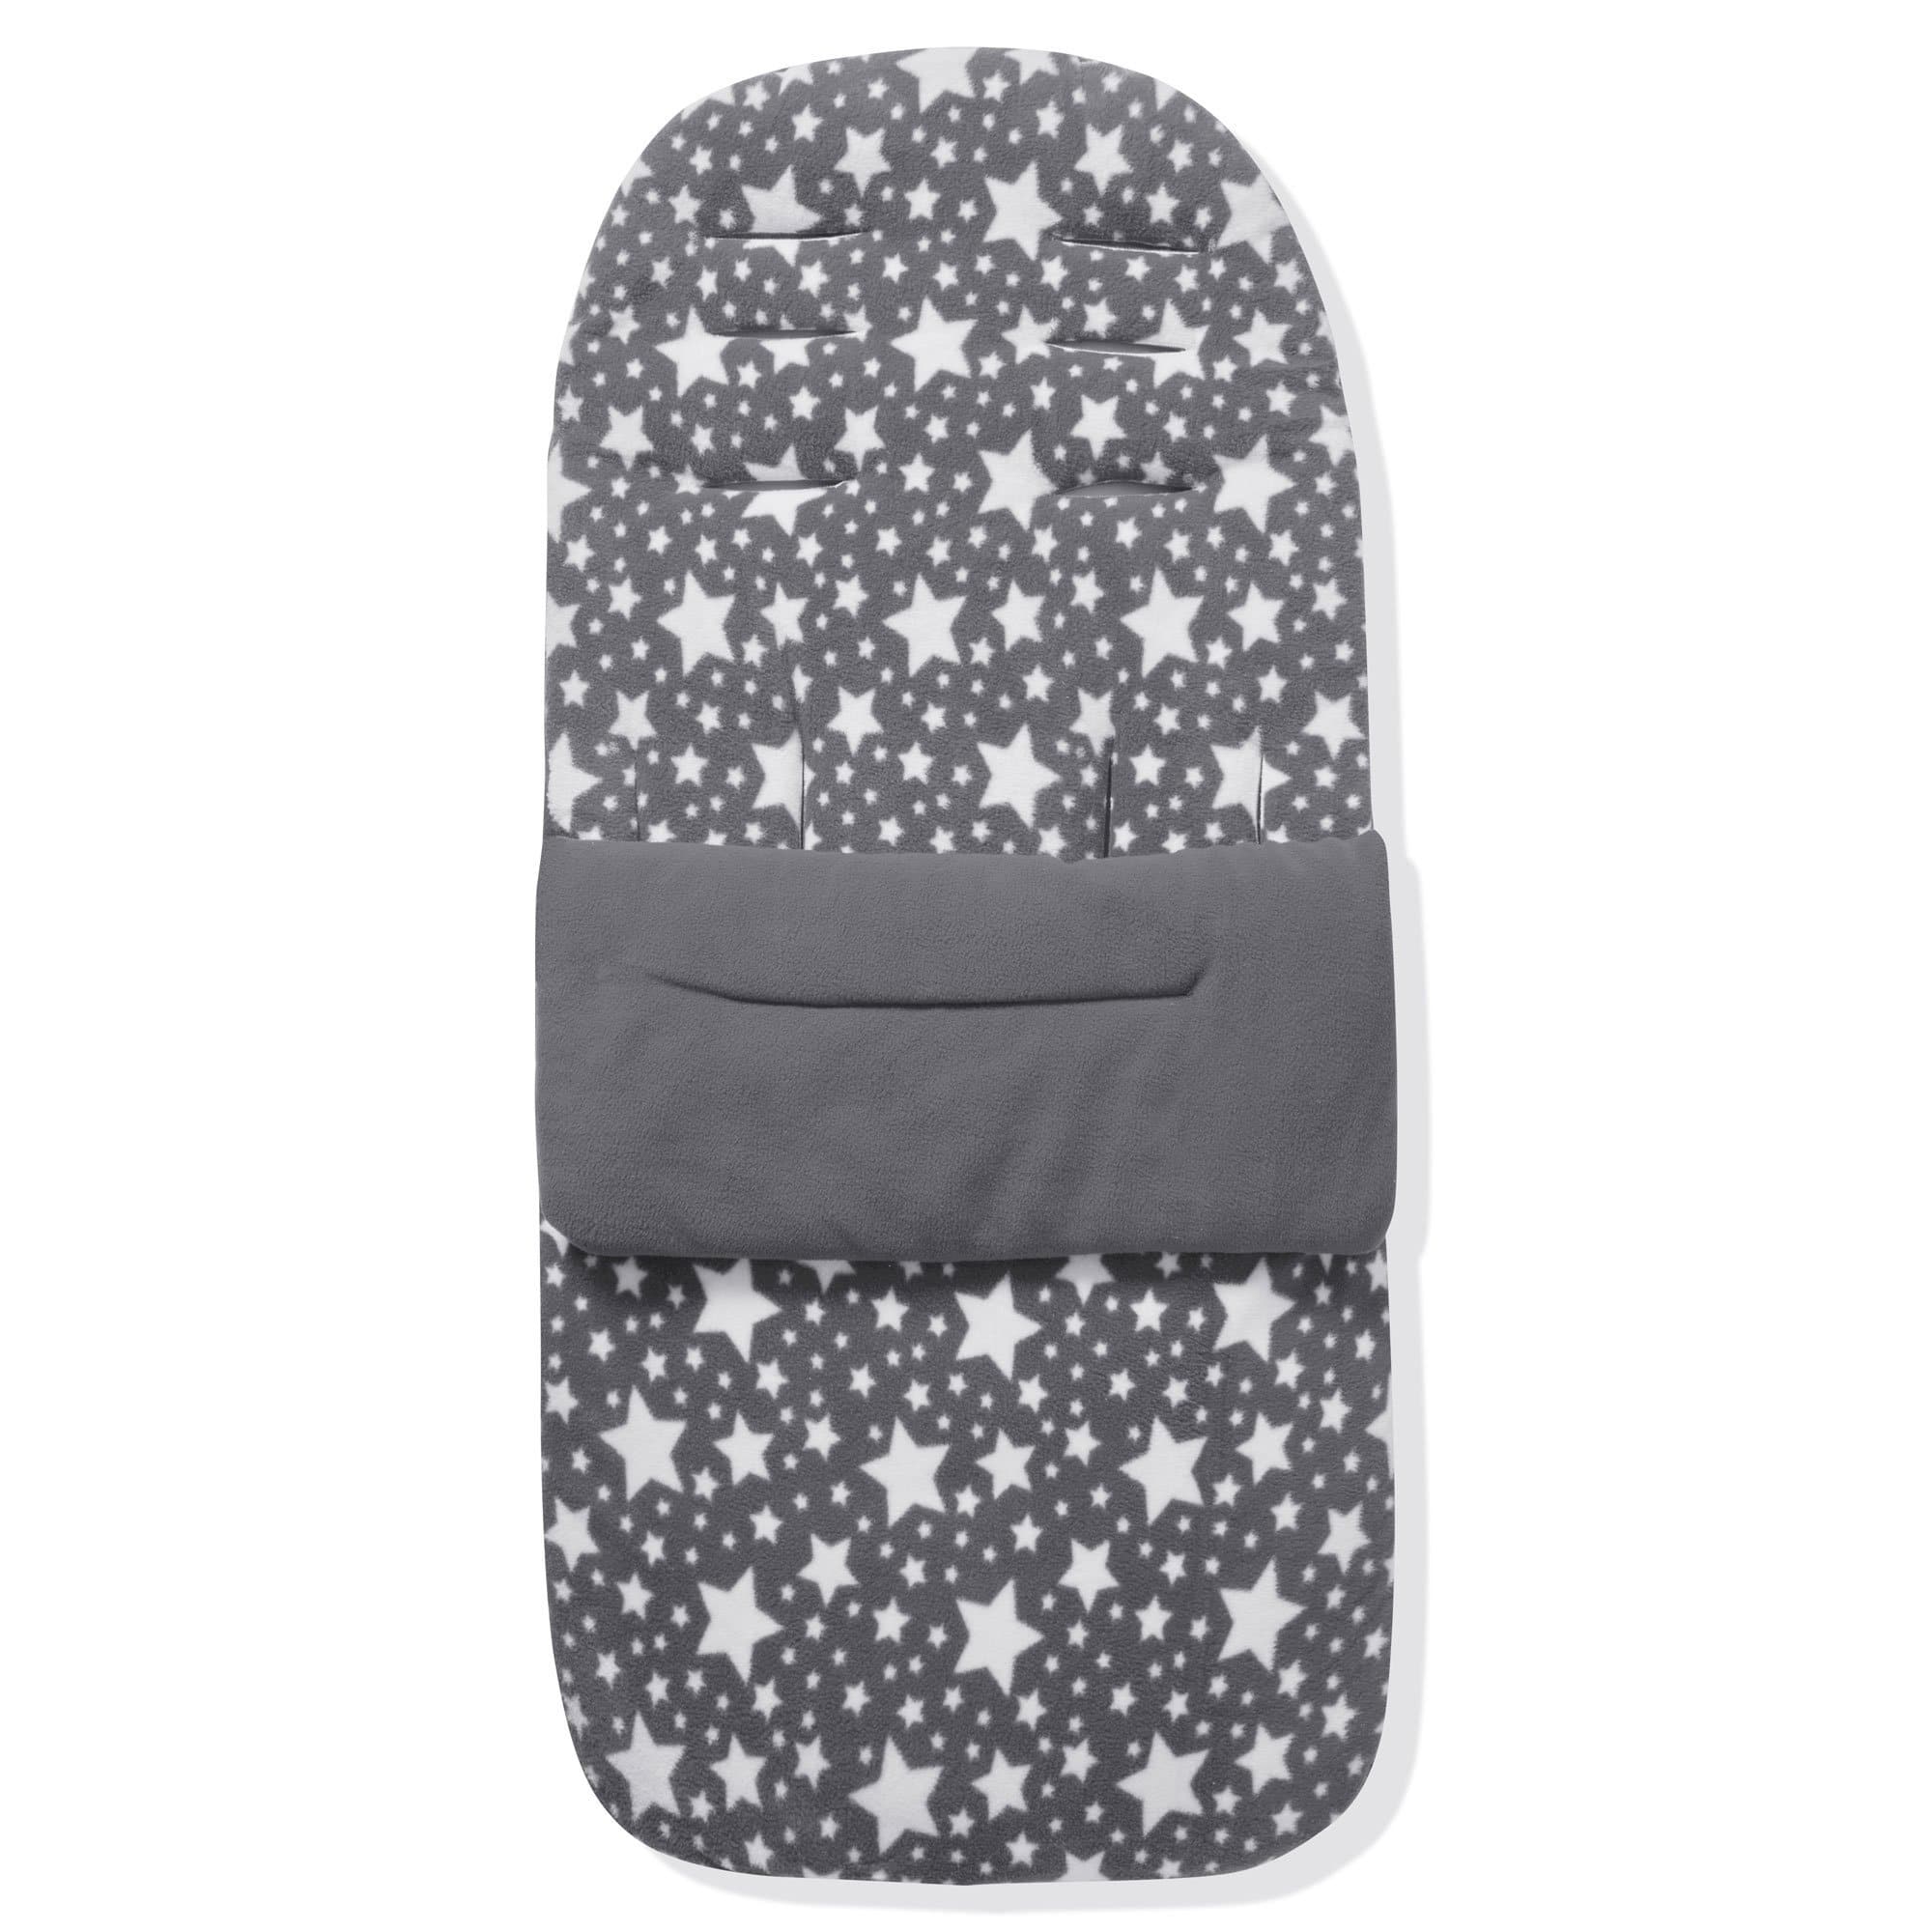 Fleece Footmuff / Cosy Toes Compatible with My Babiie - Grey Star / Fits All Models | For Your Little One